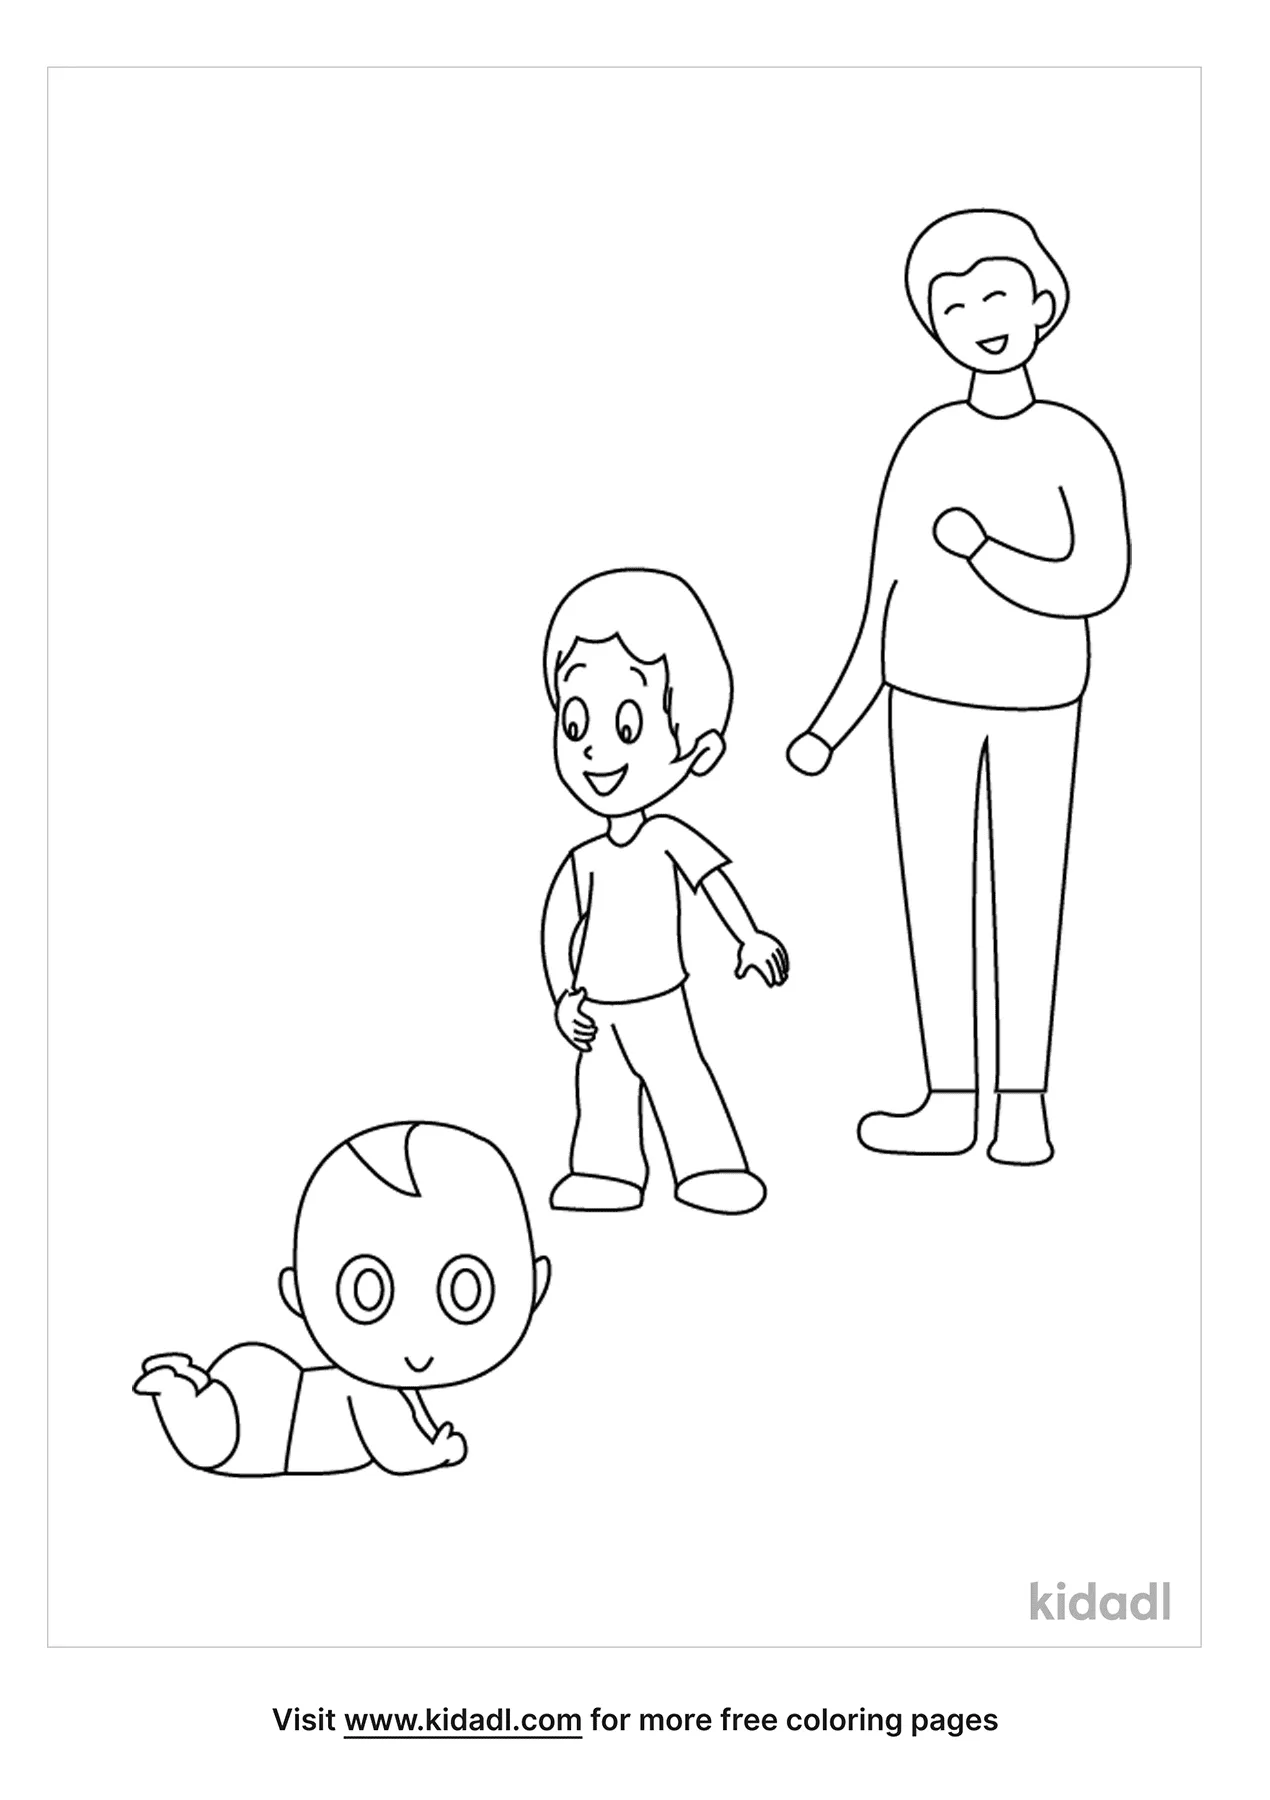 Growing Up Coloring Pages - vrogue.co